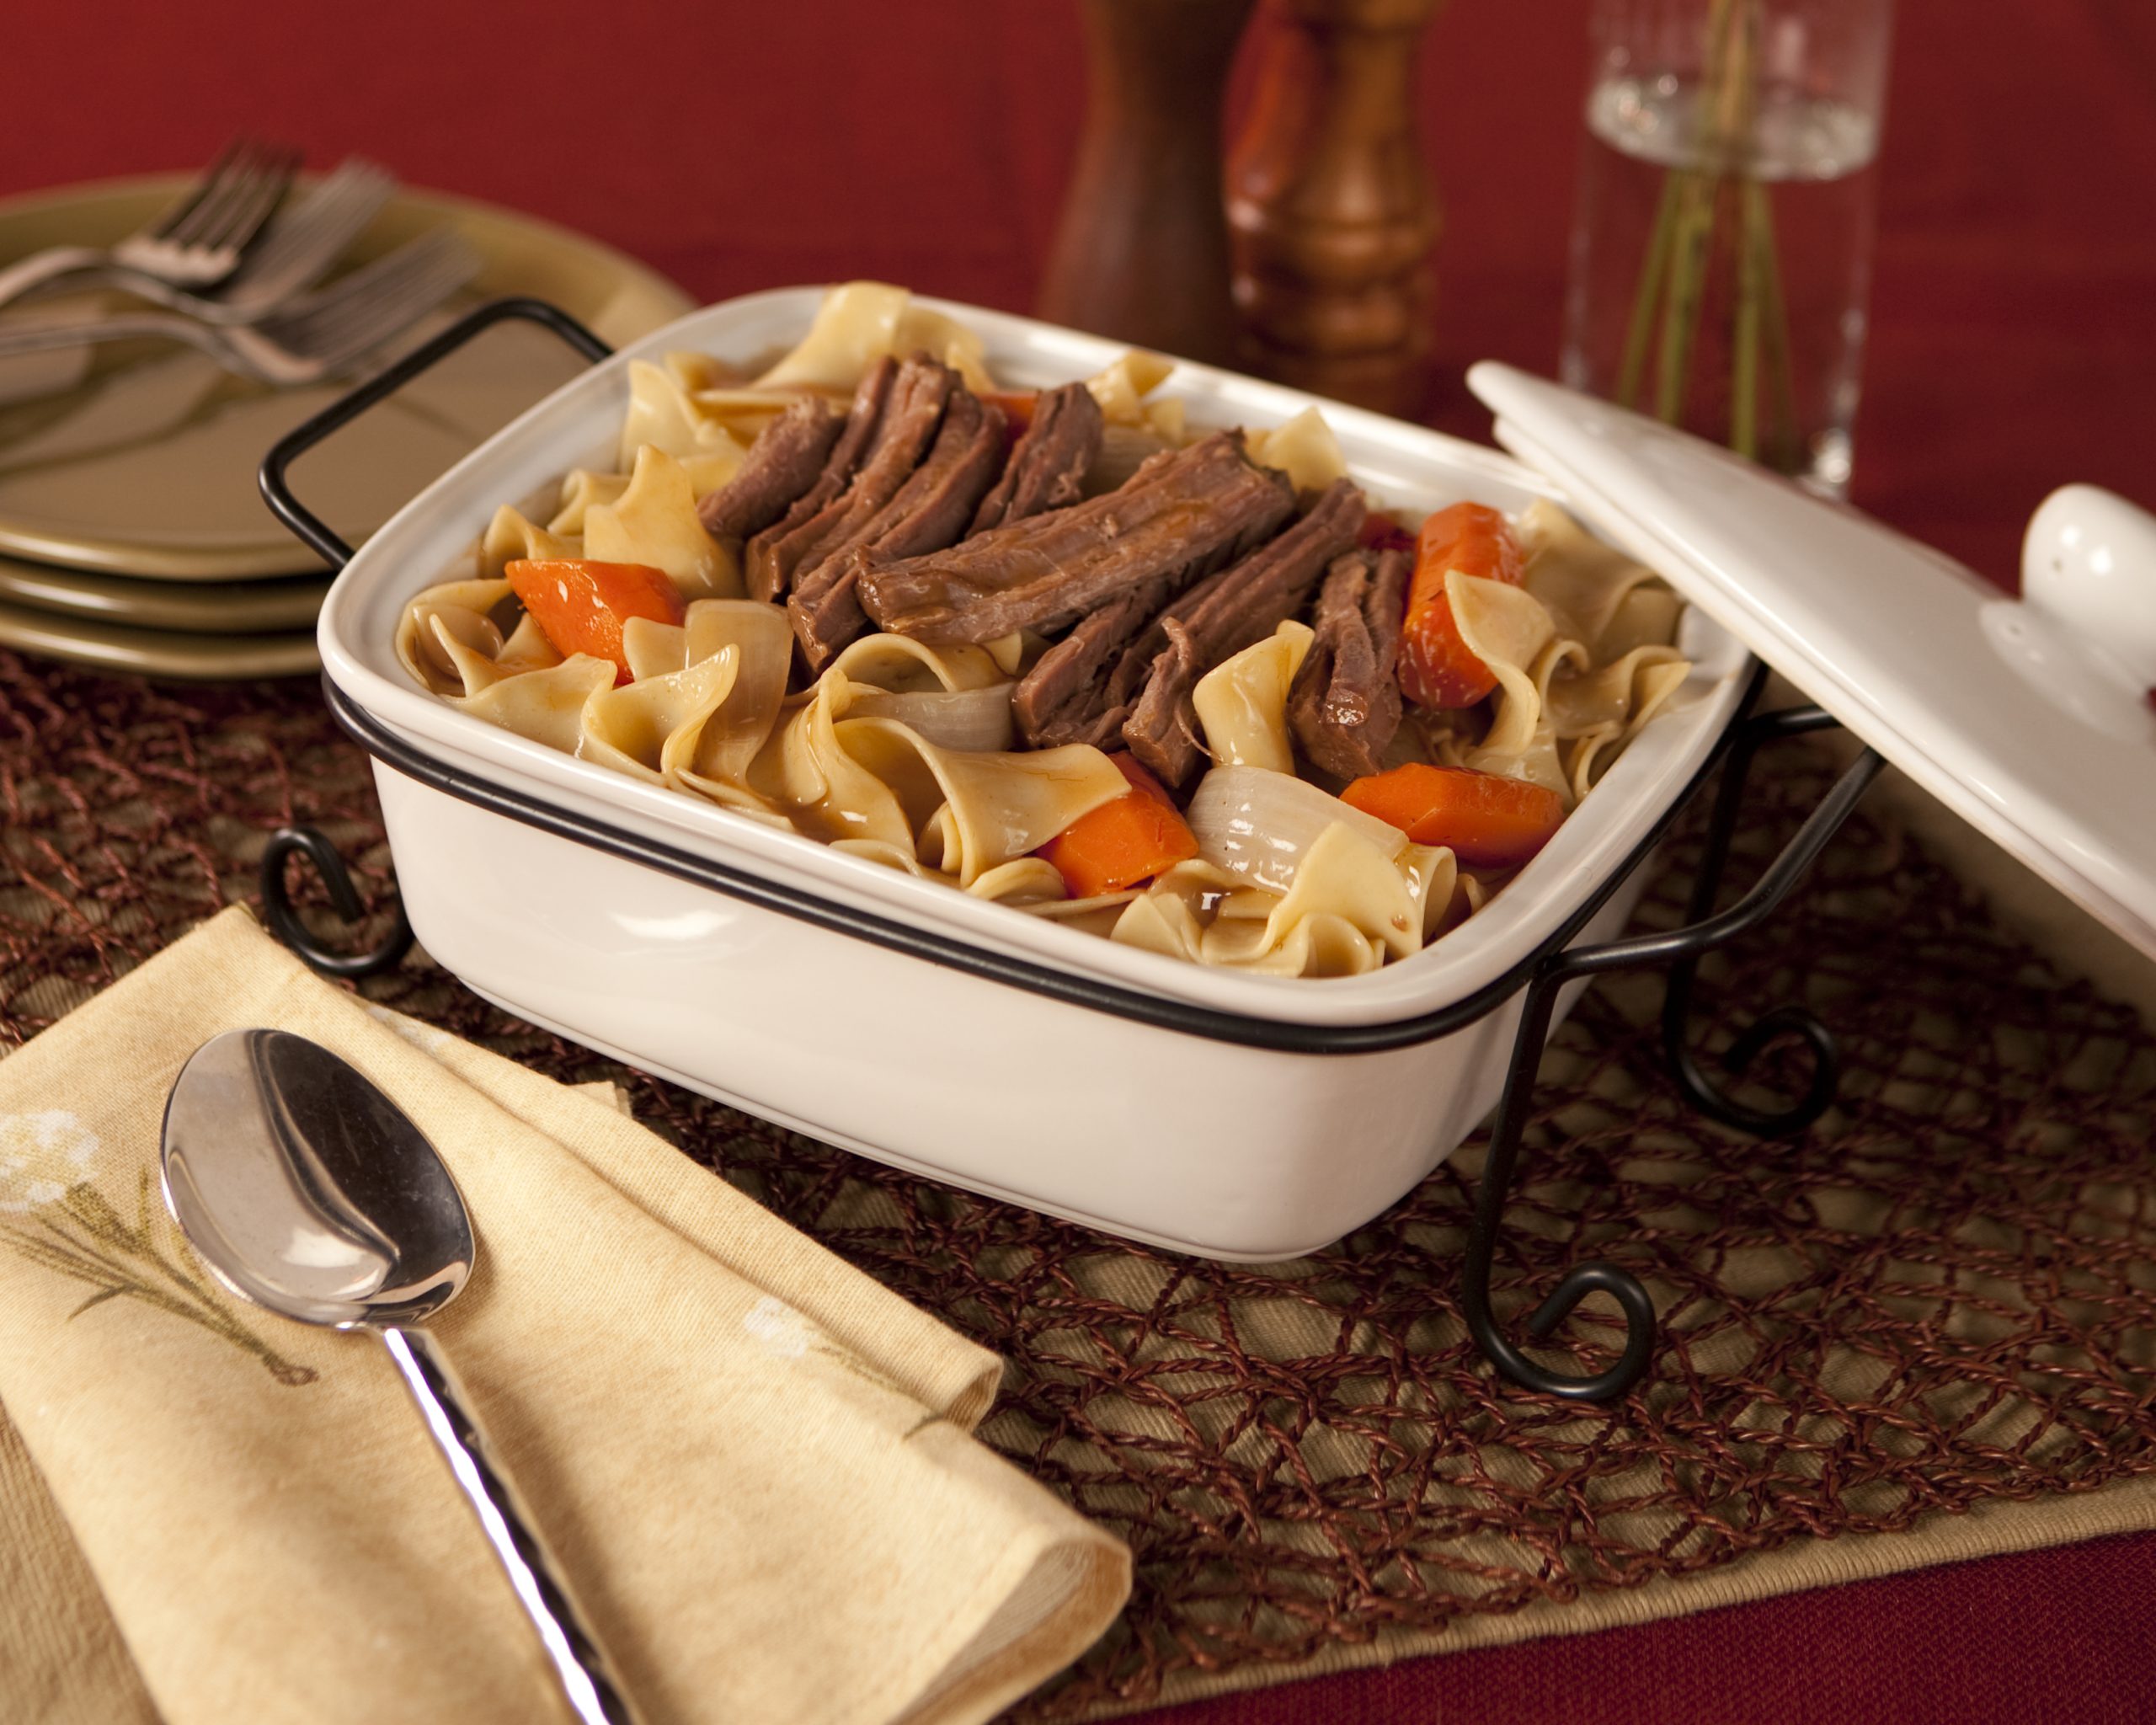 Beef pot roast and wide egg noodles with carrots and onions in a light sauce